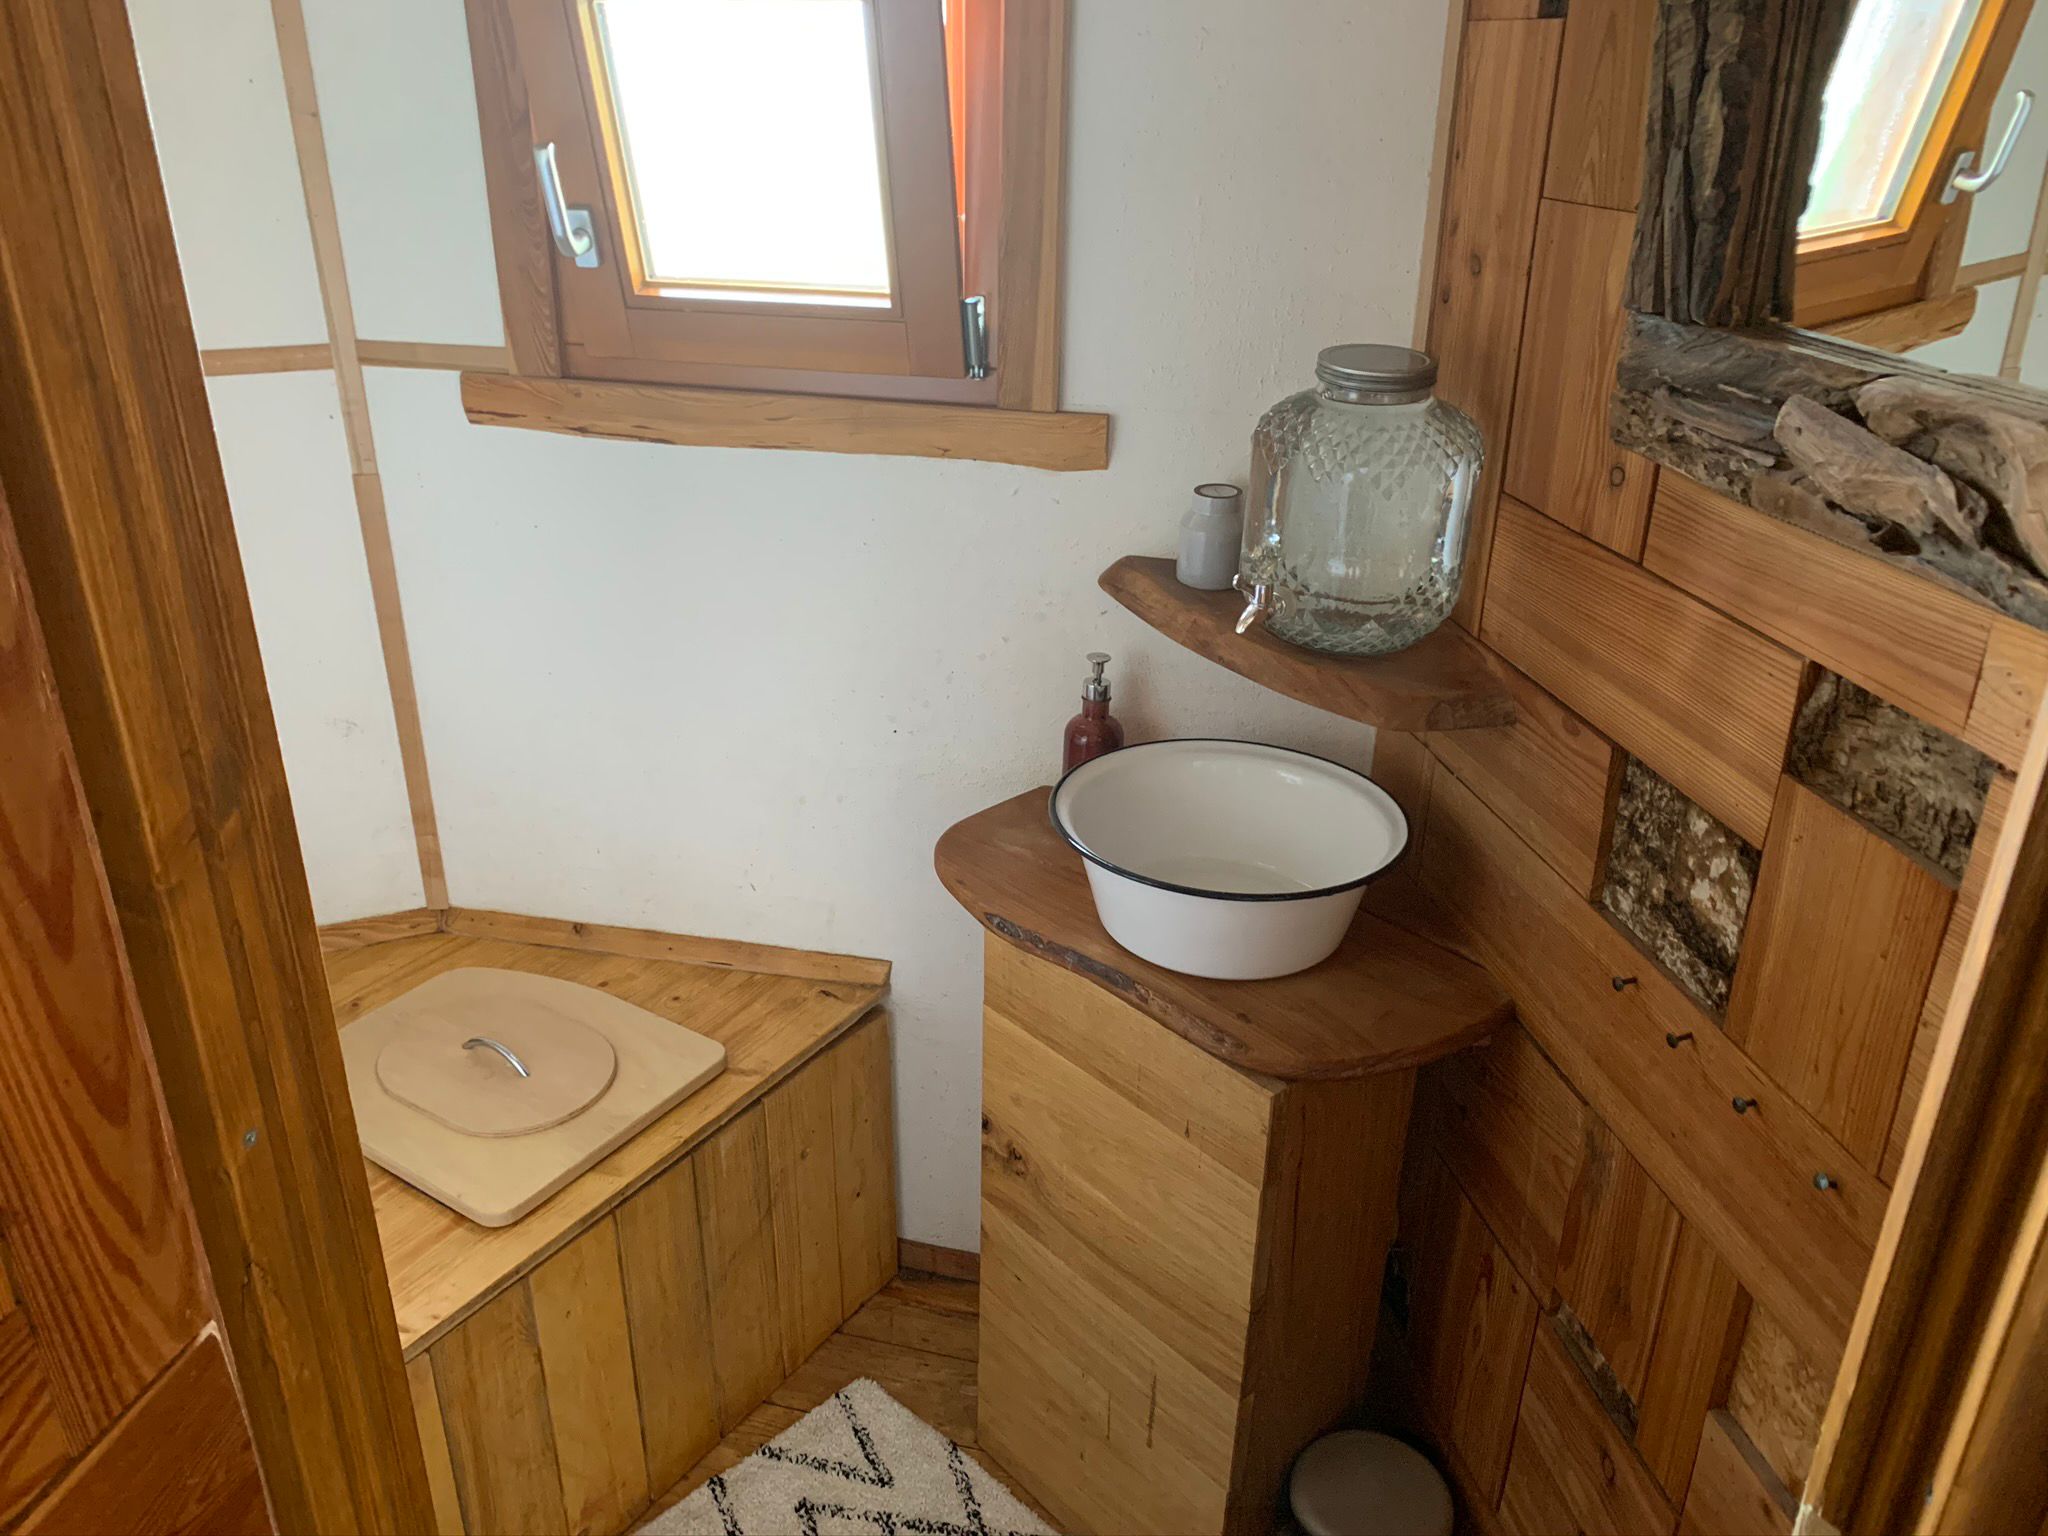 Toilet inside a treehouse at the German Treehouses